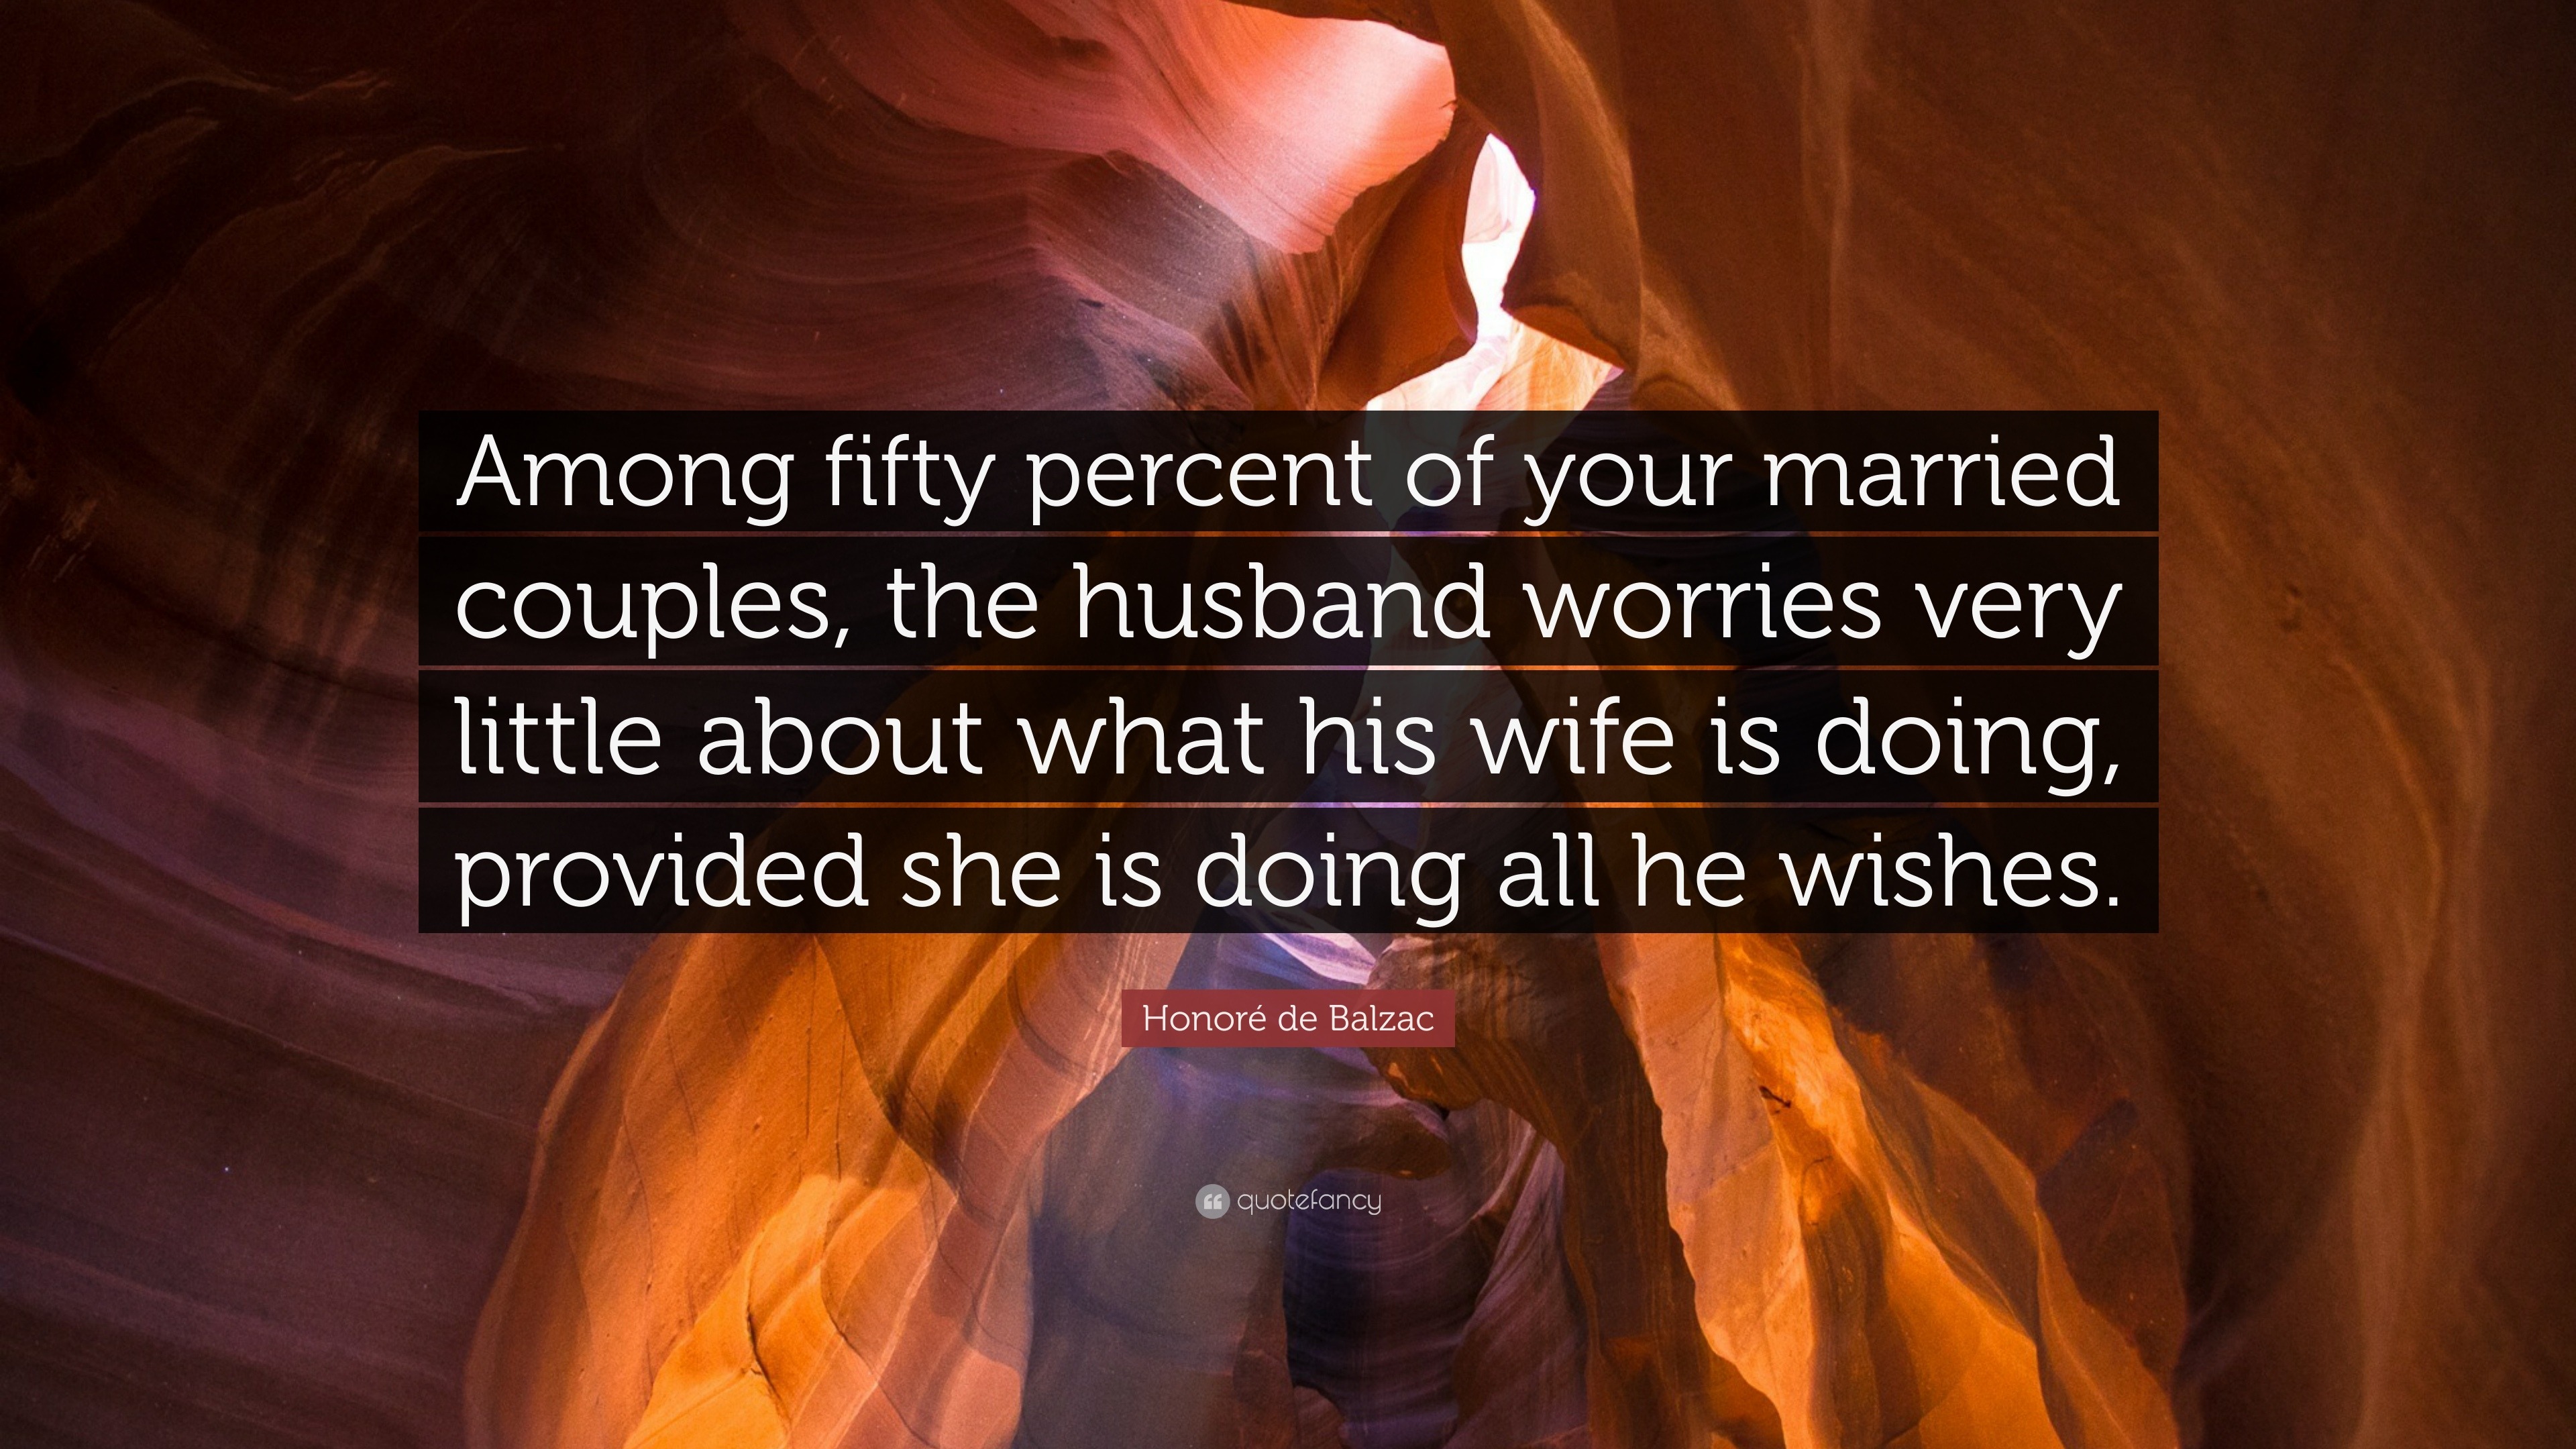 Honoré de Balzac Quote: “Among fifty percent of your married couples, the husband ...3840 x 2160